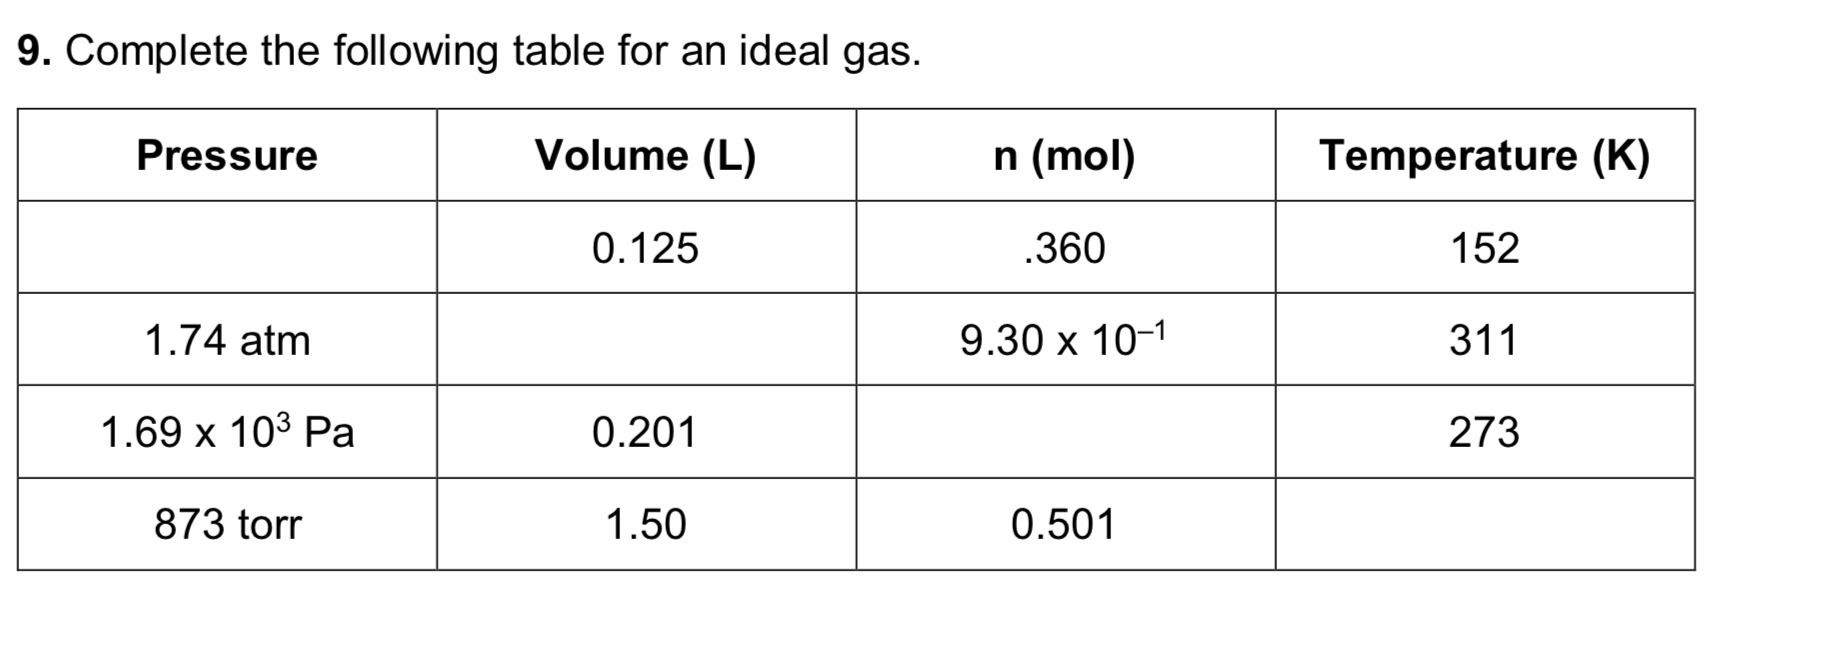 9. Complete the following table for an ideal gas.
Pressure
Volume (L)
n (mol)
Temperature (K)
0.125
.360
152
1.74 atm
9.30 x 10-1
311
1.69 x 103 Pa
0.201
273
873 torr
1.50
0.501
